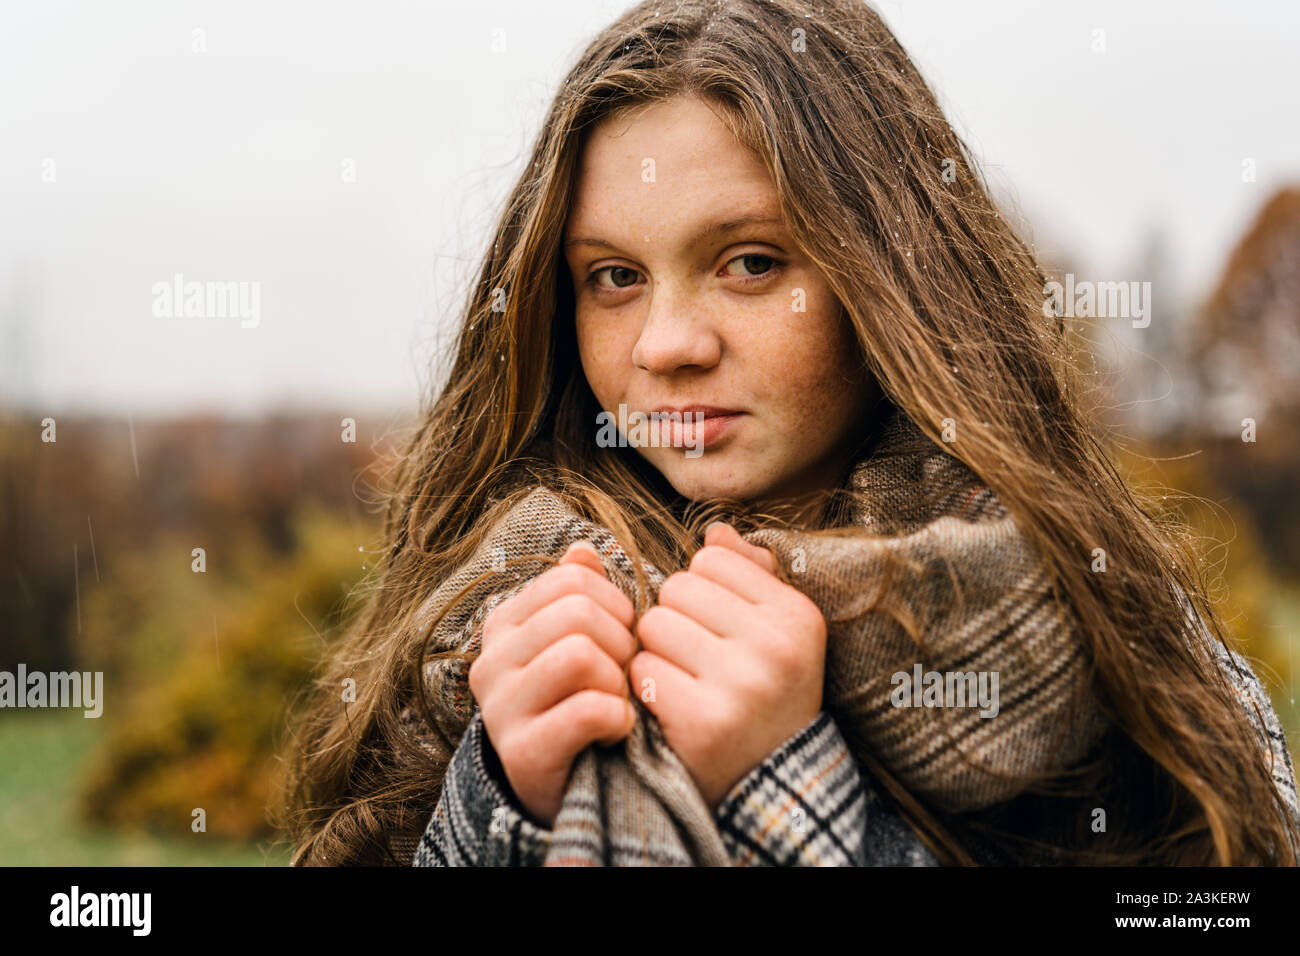 Red-headed freckled girl in autumn yellow park. Stock Photo